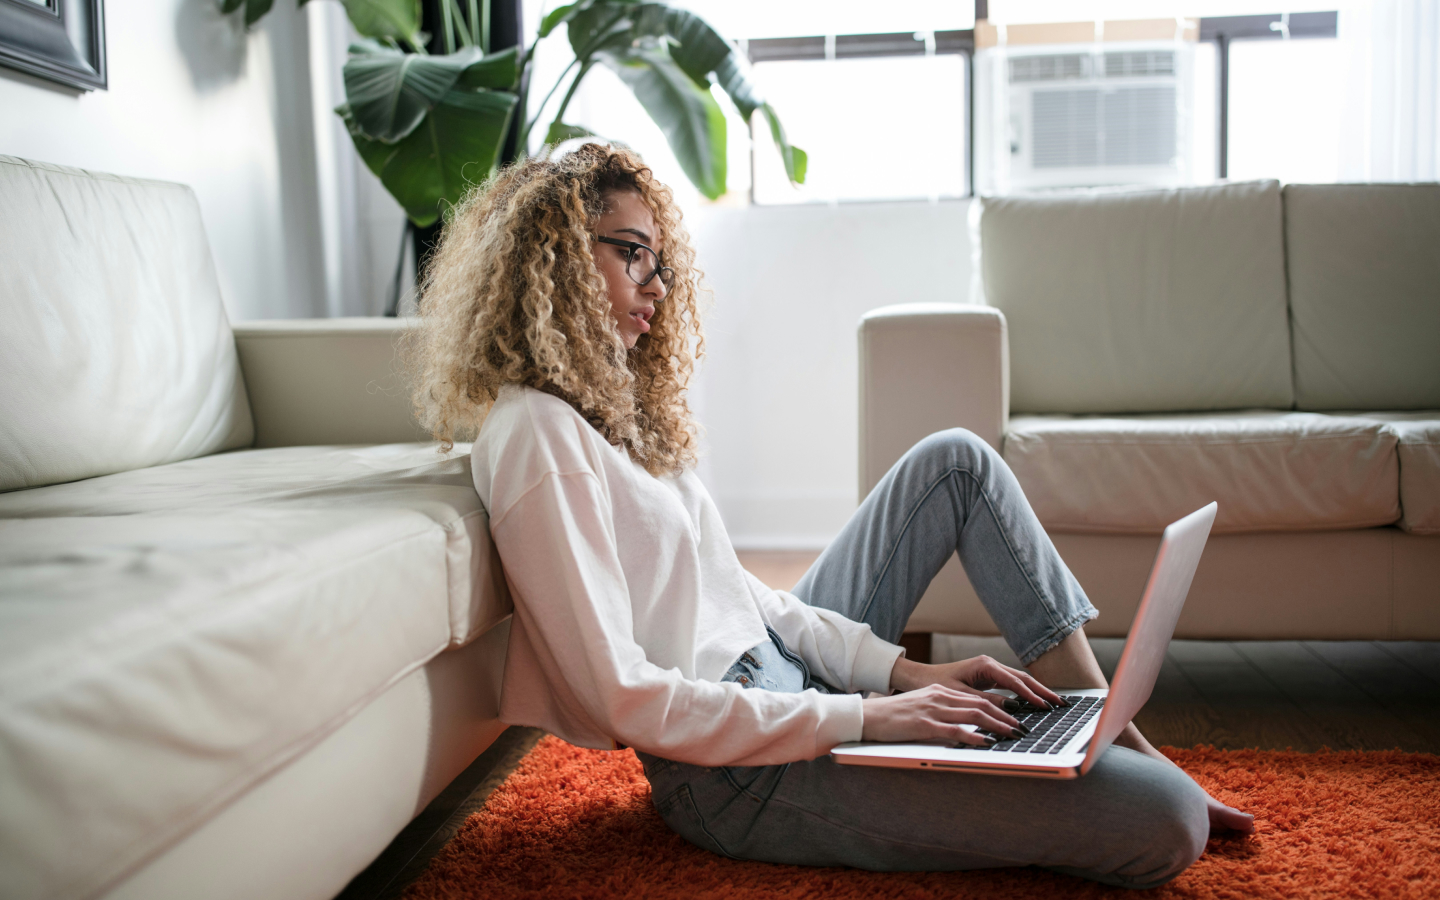 A young woman with curly hair and glasses sitting on the floor, leaning against a couch, and working on a laptop in a cozy, well-lit living room with a large plant and white furniture.